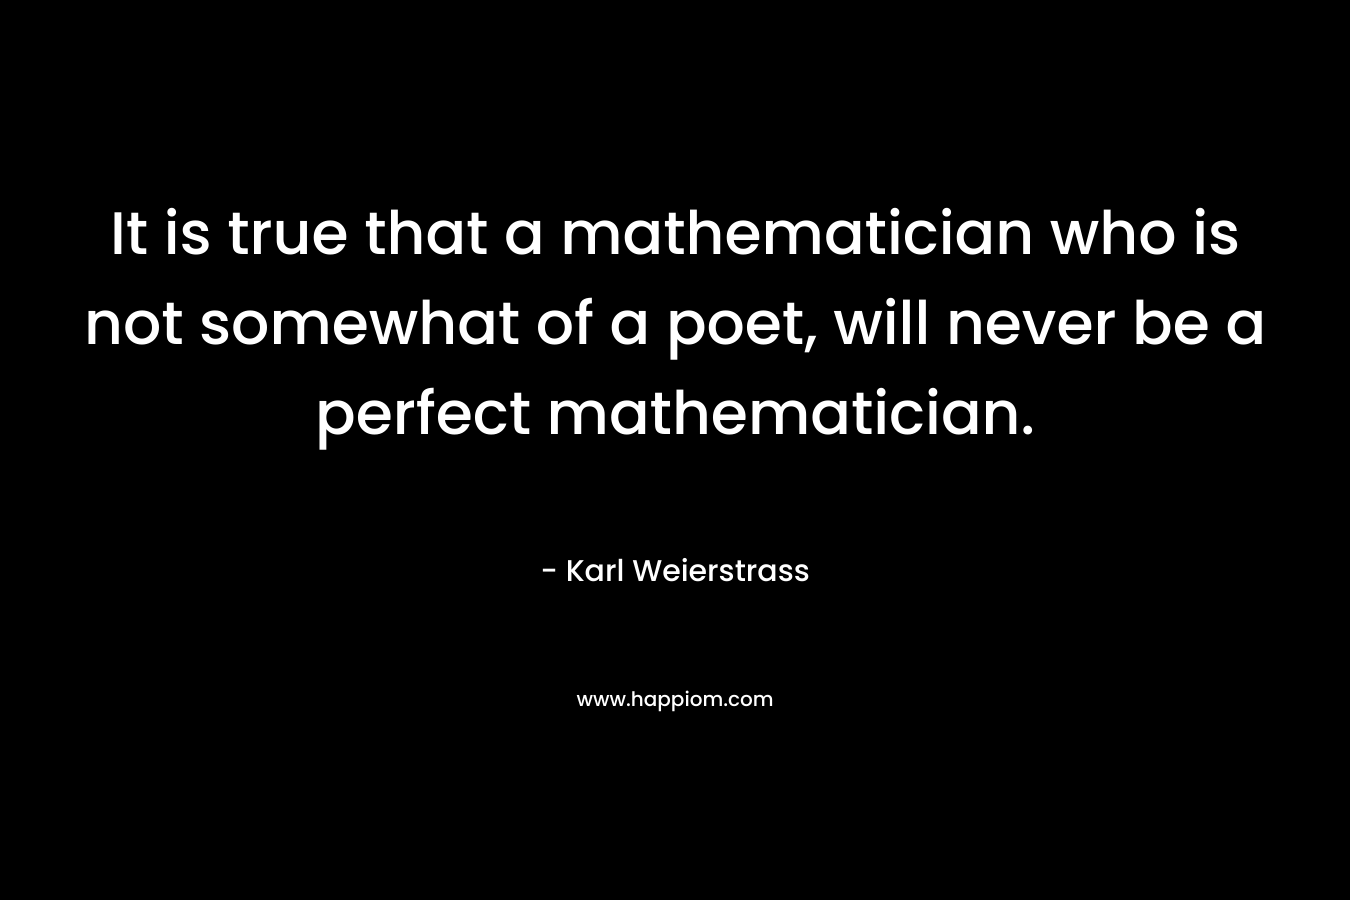 It is true that a mathematician who is not somewhat of a poet, will never be a perfect mathematician. – Karl Weierstrass